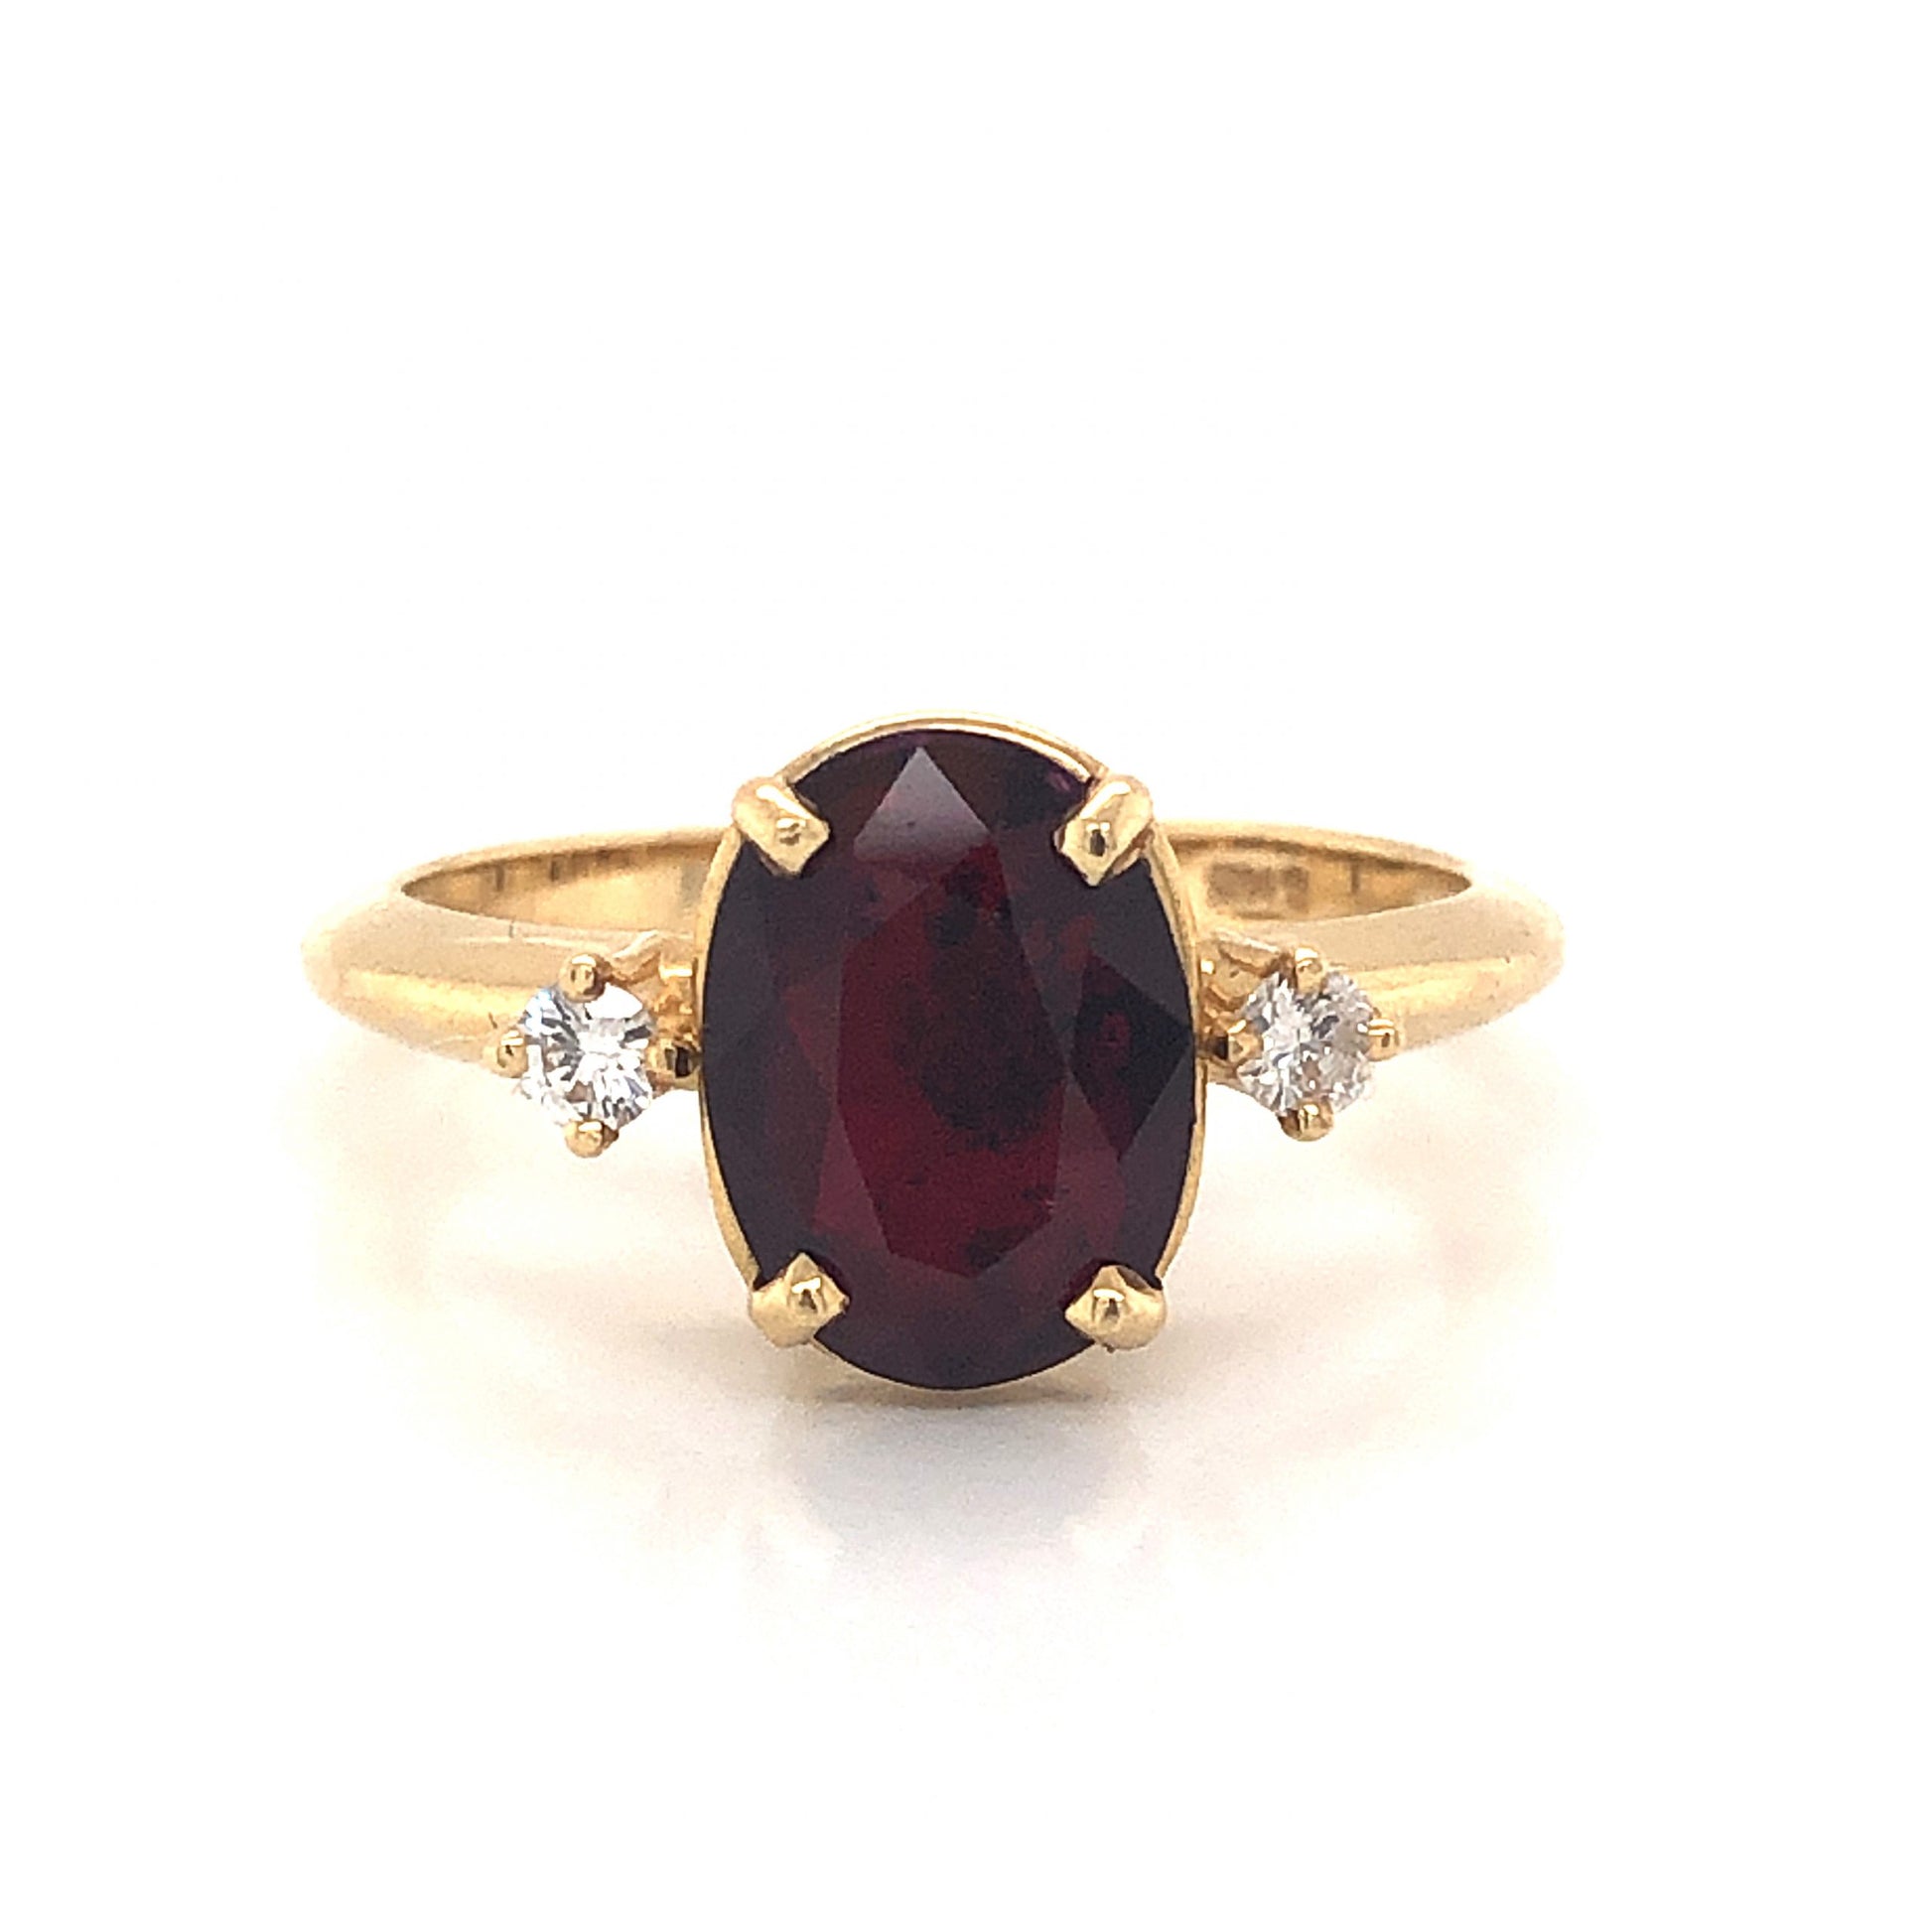 Oval Cut Ruby Engagement Ring in 14k Yellow GoldComposition: 14 Karat Yellow Gold Ring Size: 6.5 Total Diamond Weight: .10ct Total Gram Weight: 2.7 g Inscription: 14k
      